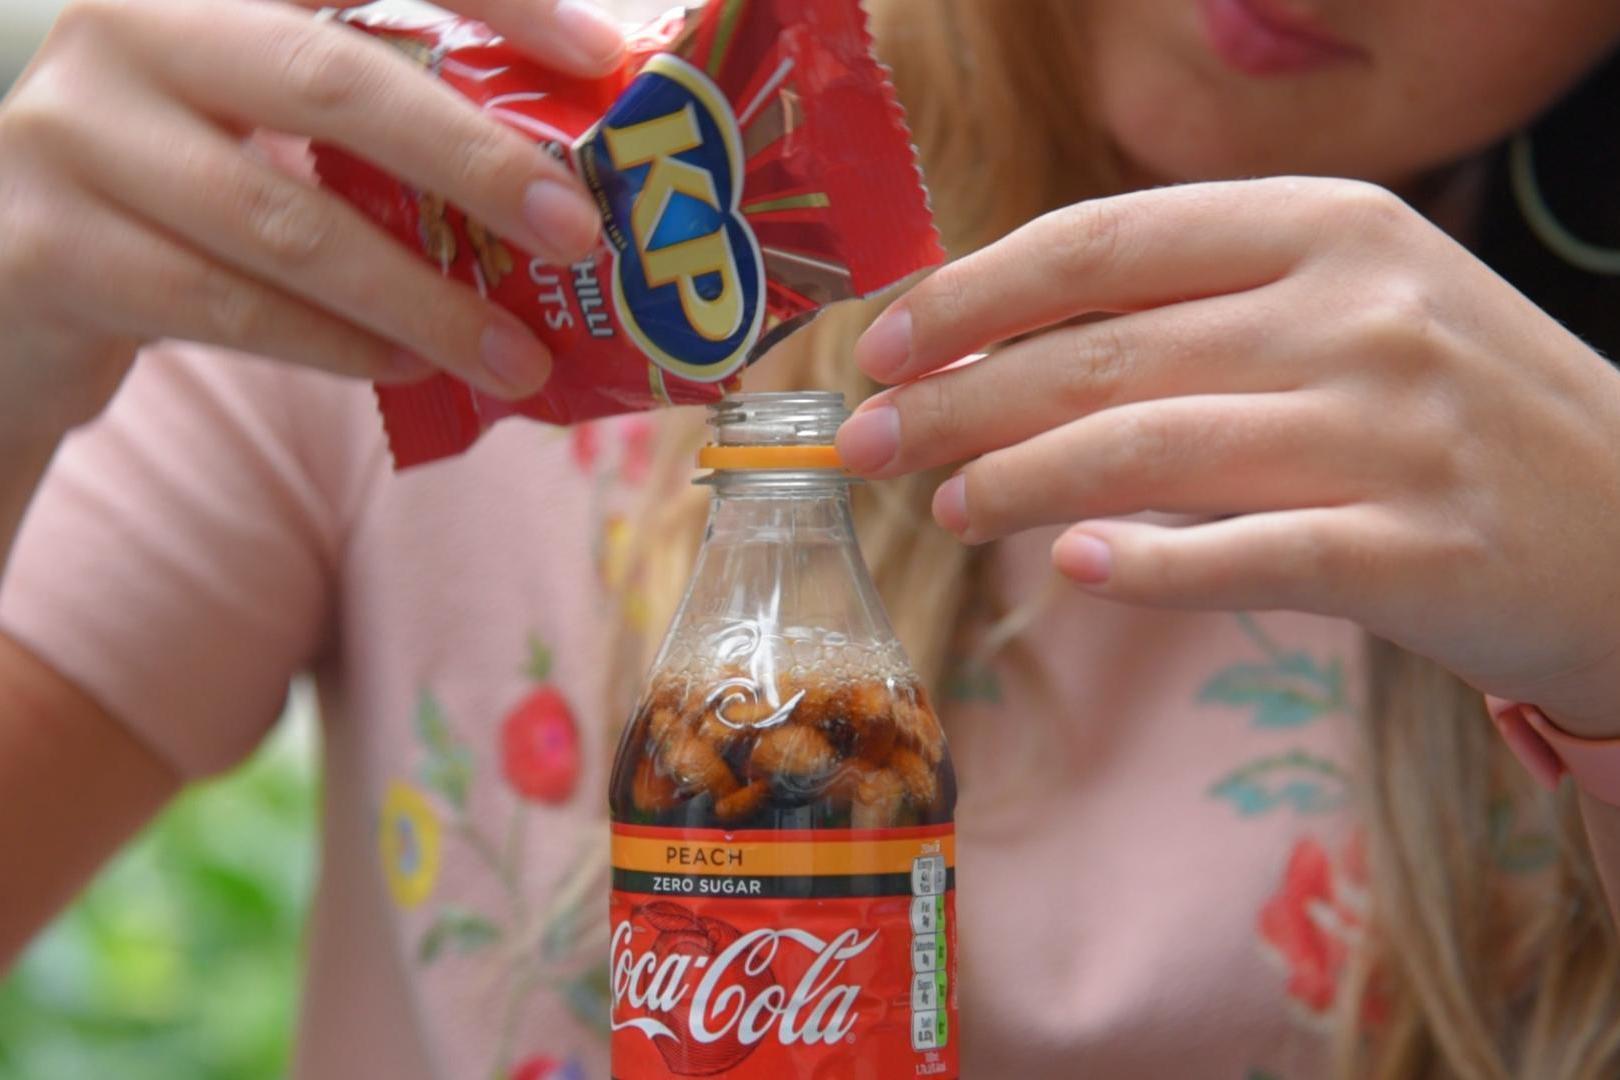 Chilli peanuts and peach-flavoured Coke was not a winning combination